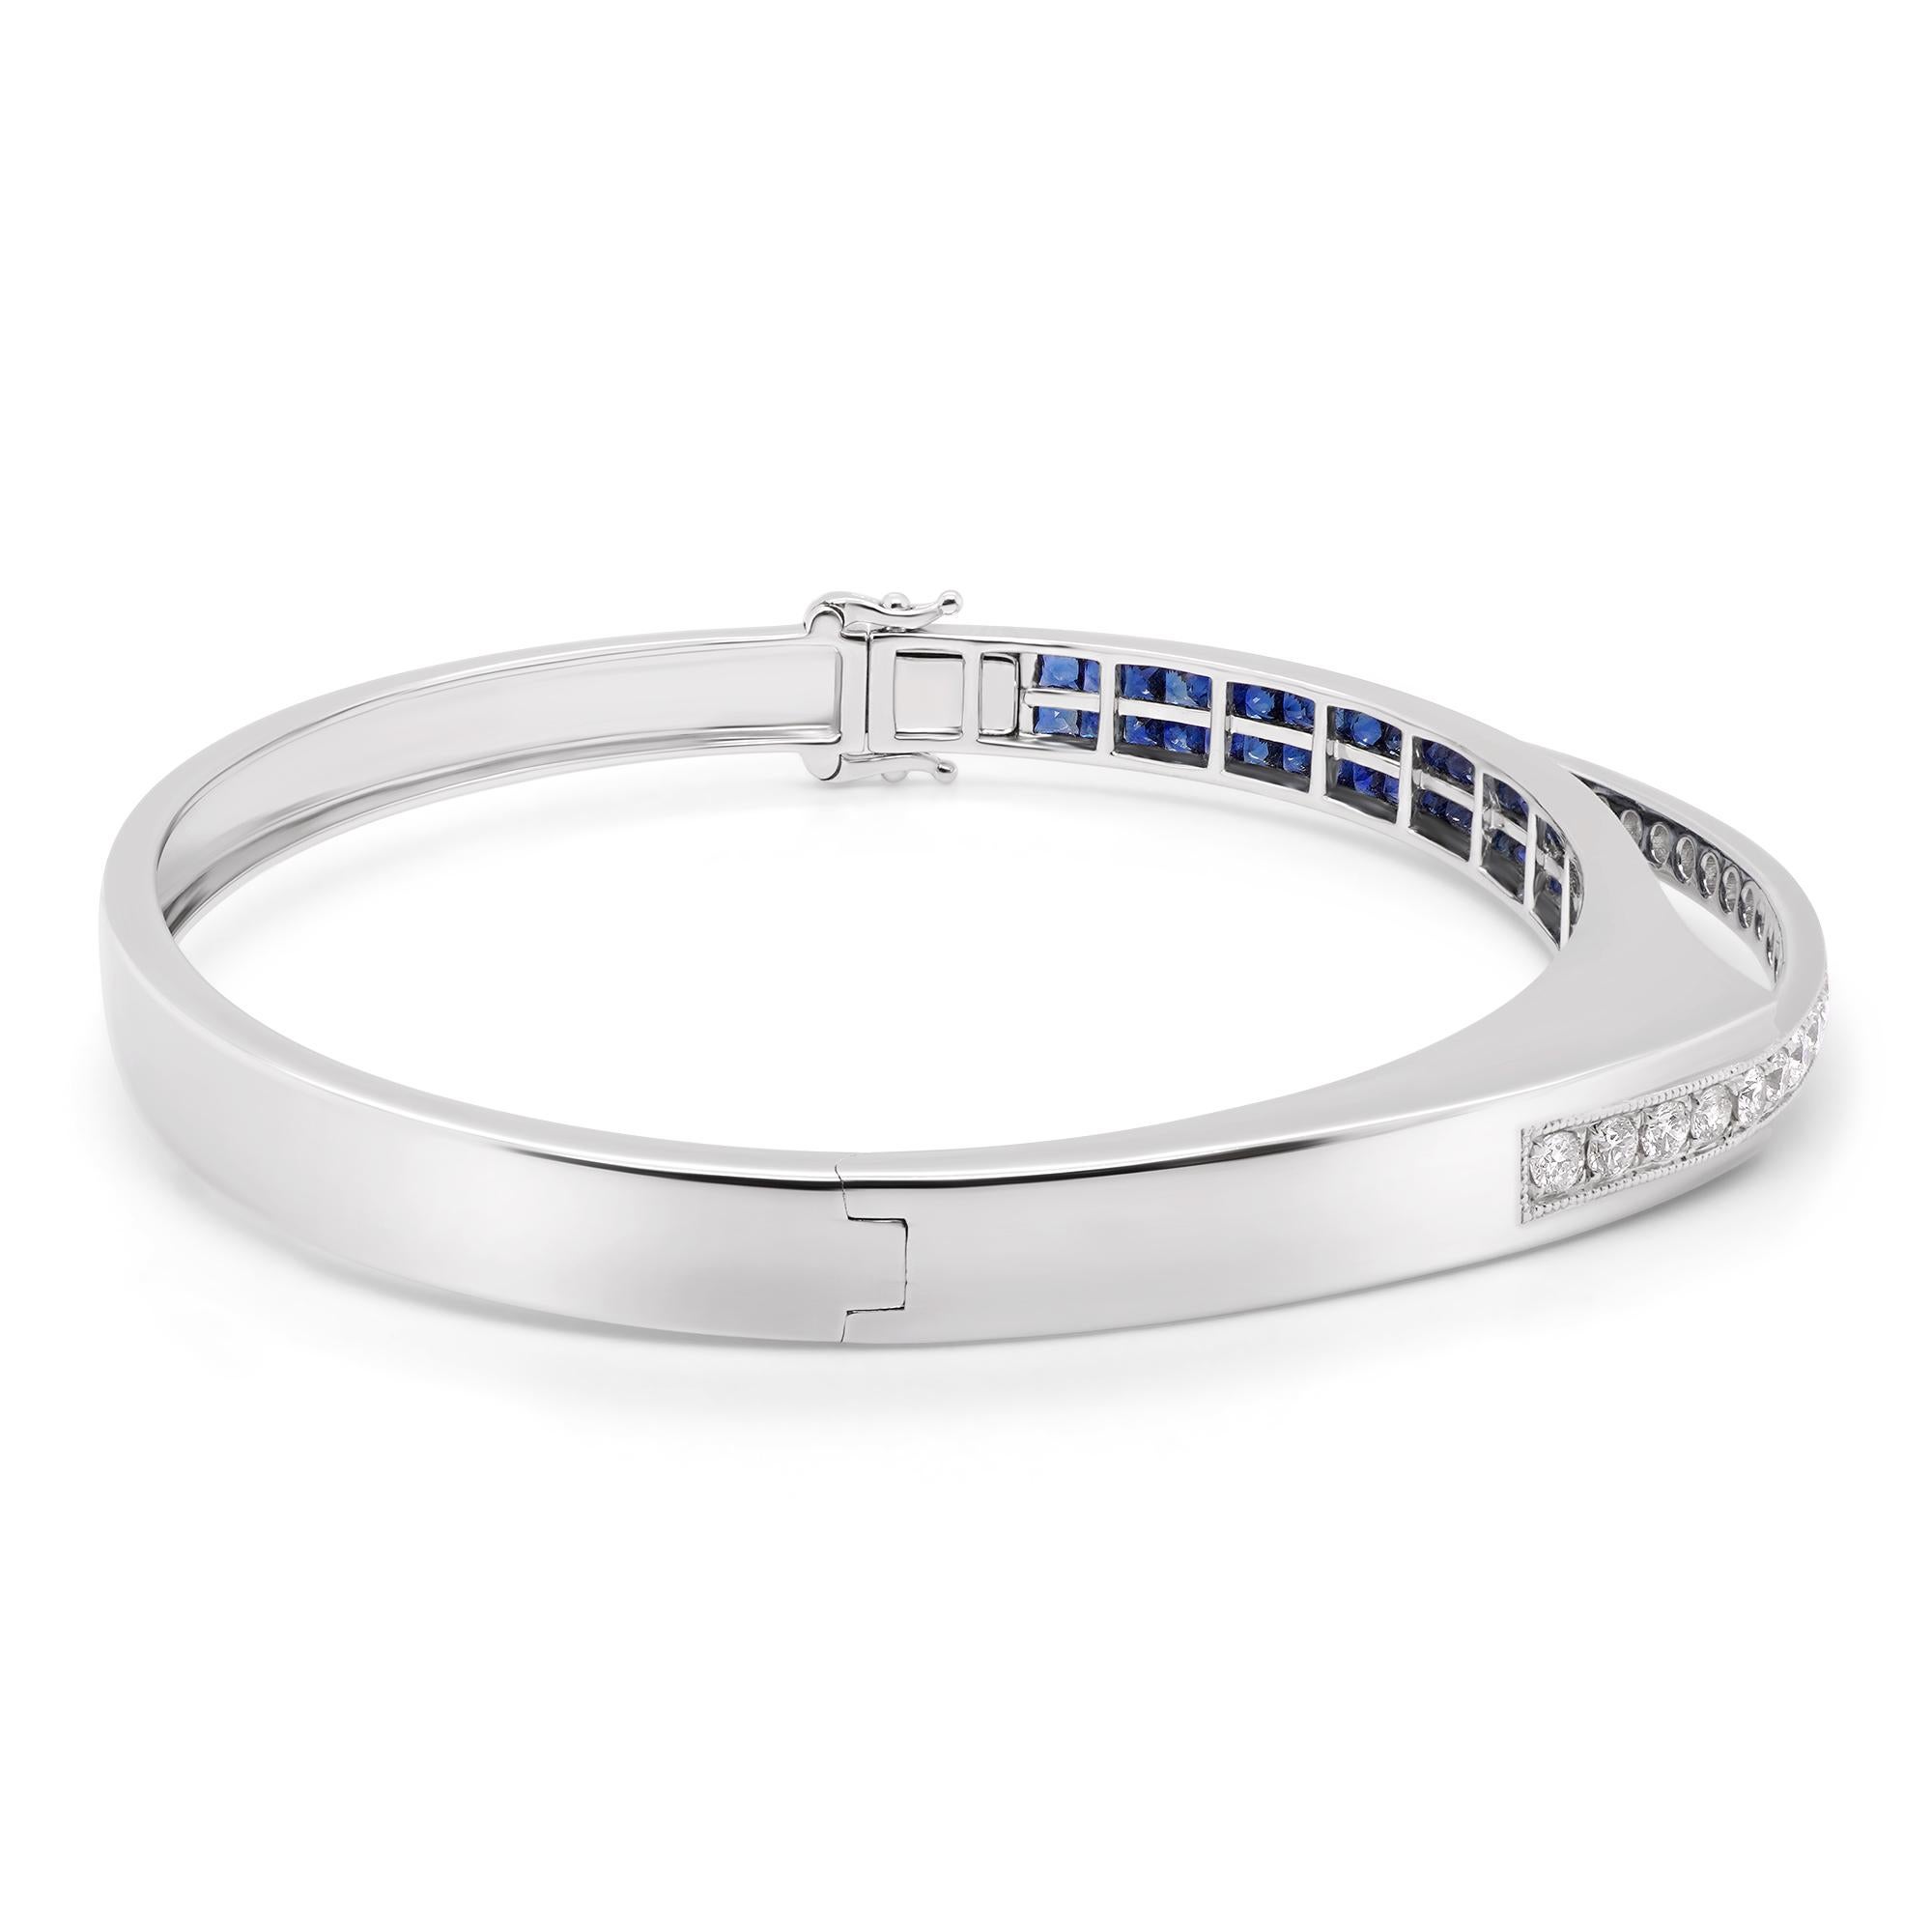 3.38 carats of vivid blue sapphire and 0.68 carats of white brilliant round diamond are set in a 18K bangle hand made in Japan. The details of the diamond are mentioned below:

Color: F

Clarity: VS